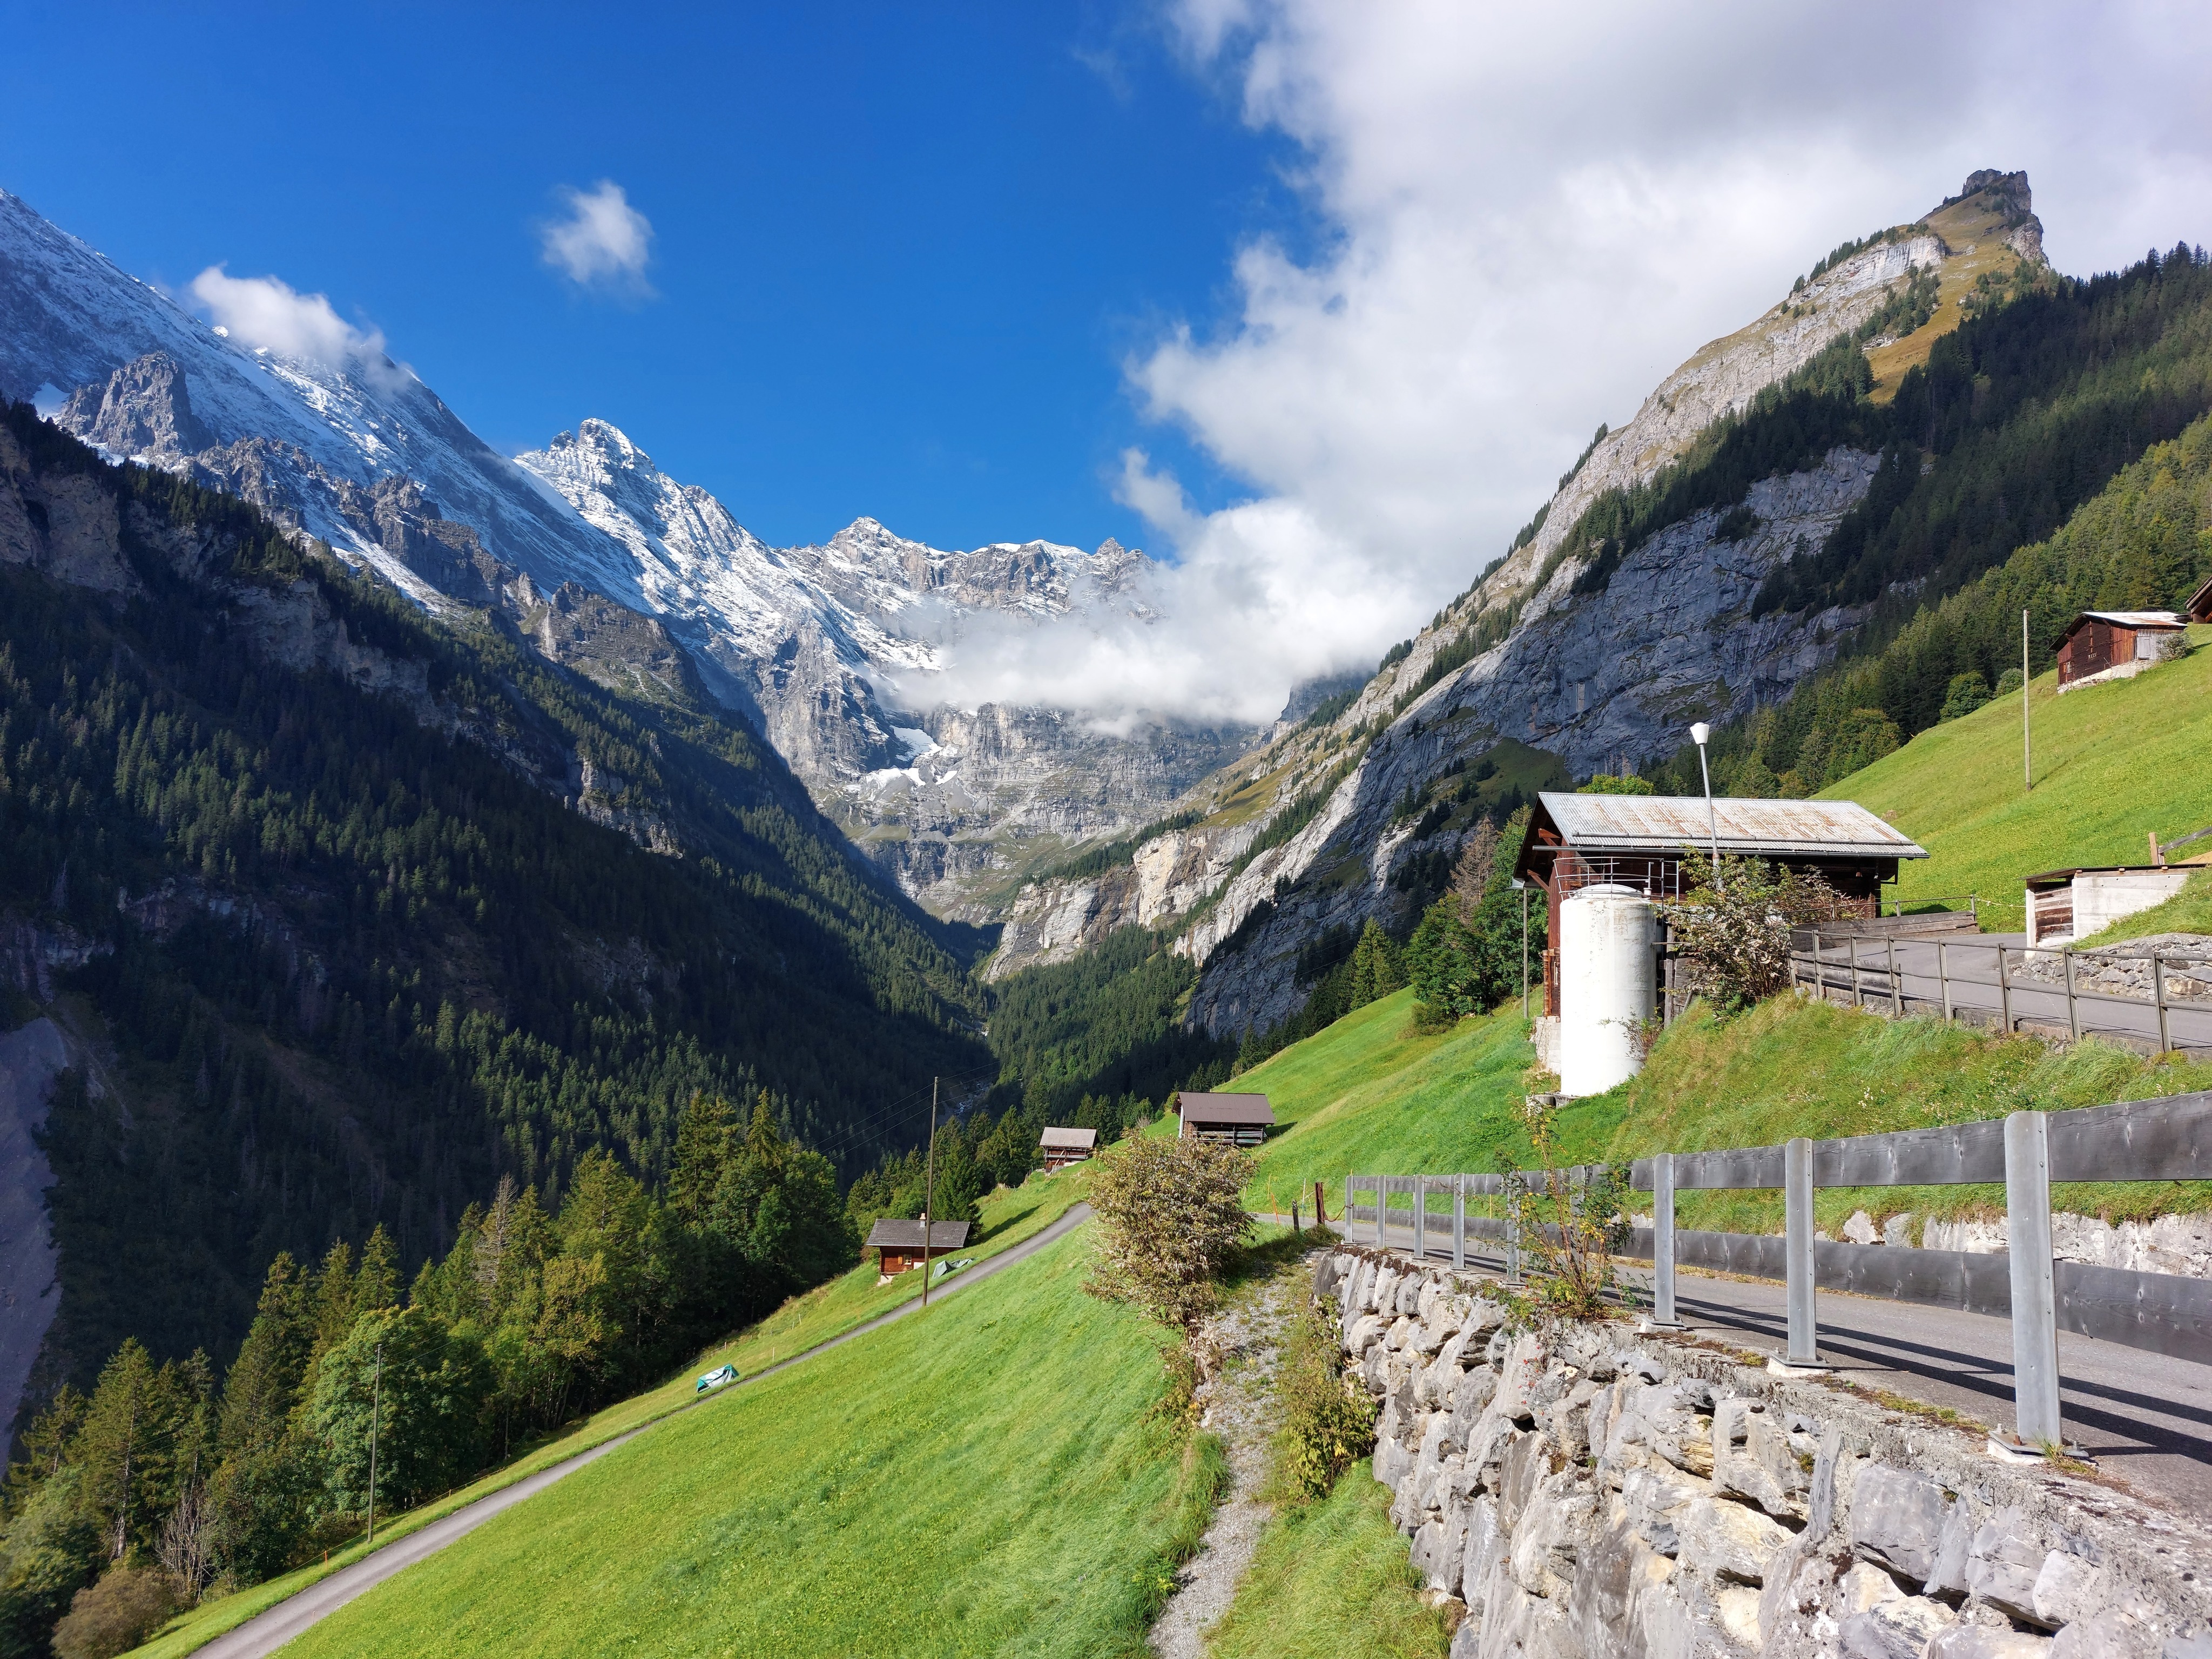 Sefinental valley from Gimmelwald